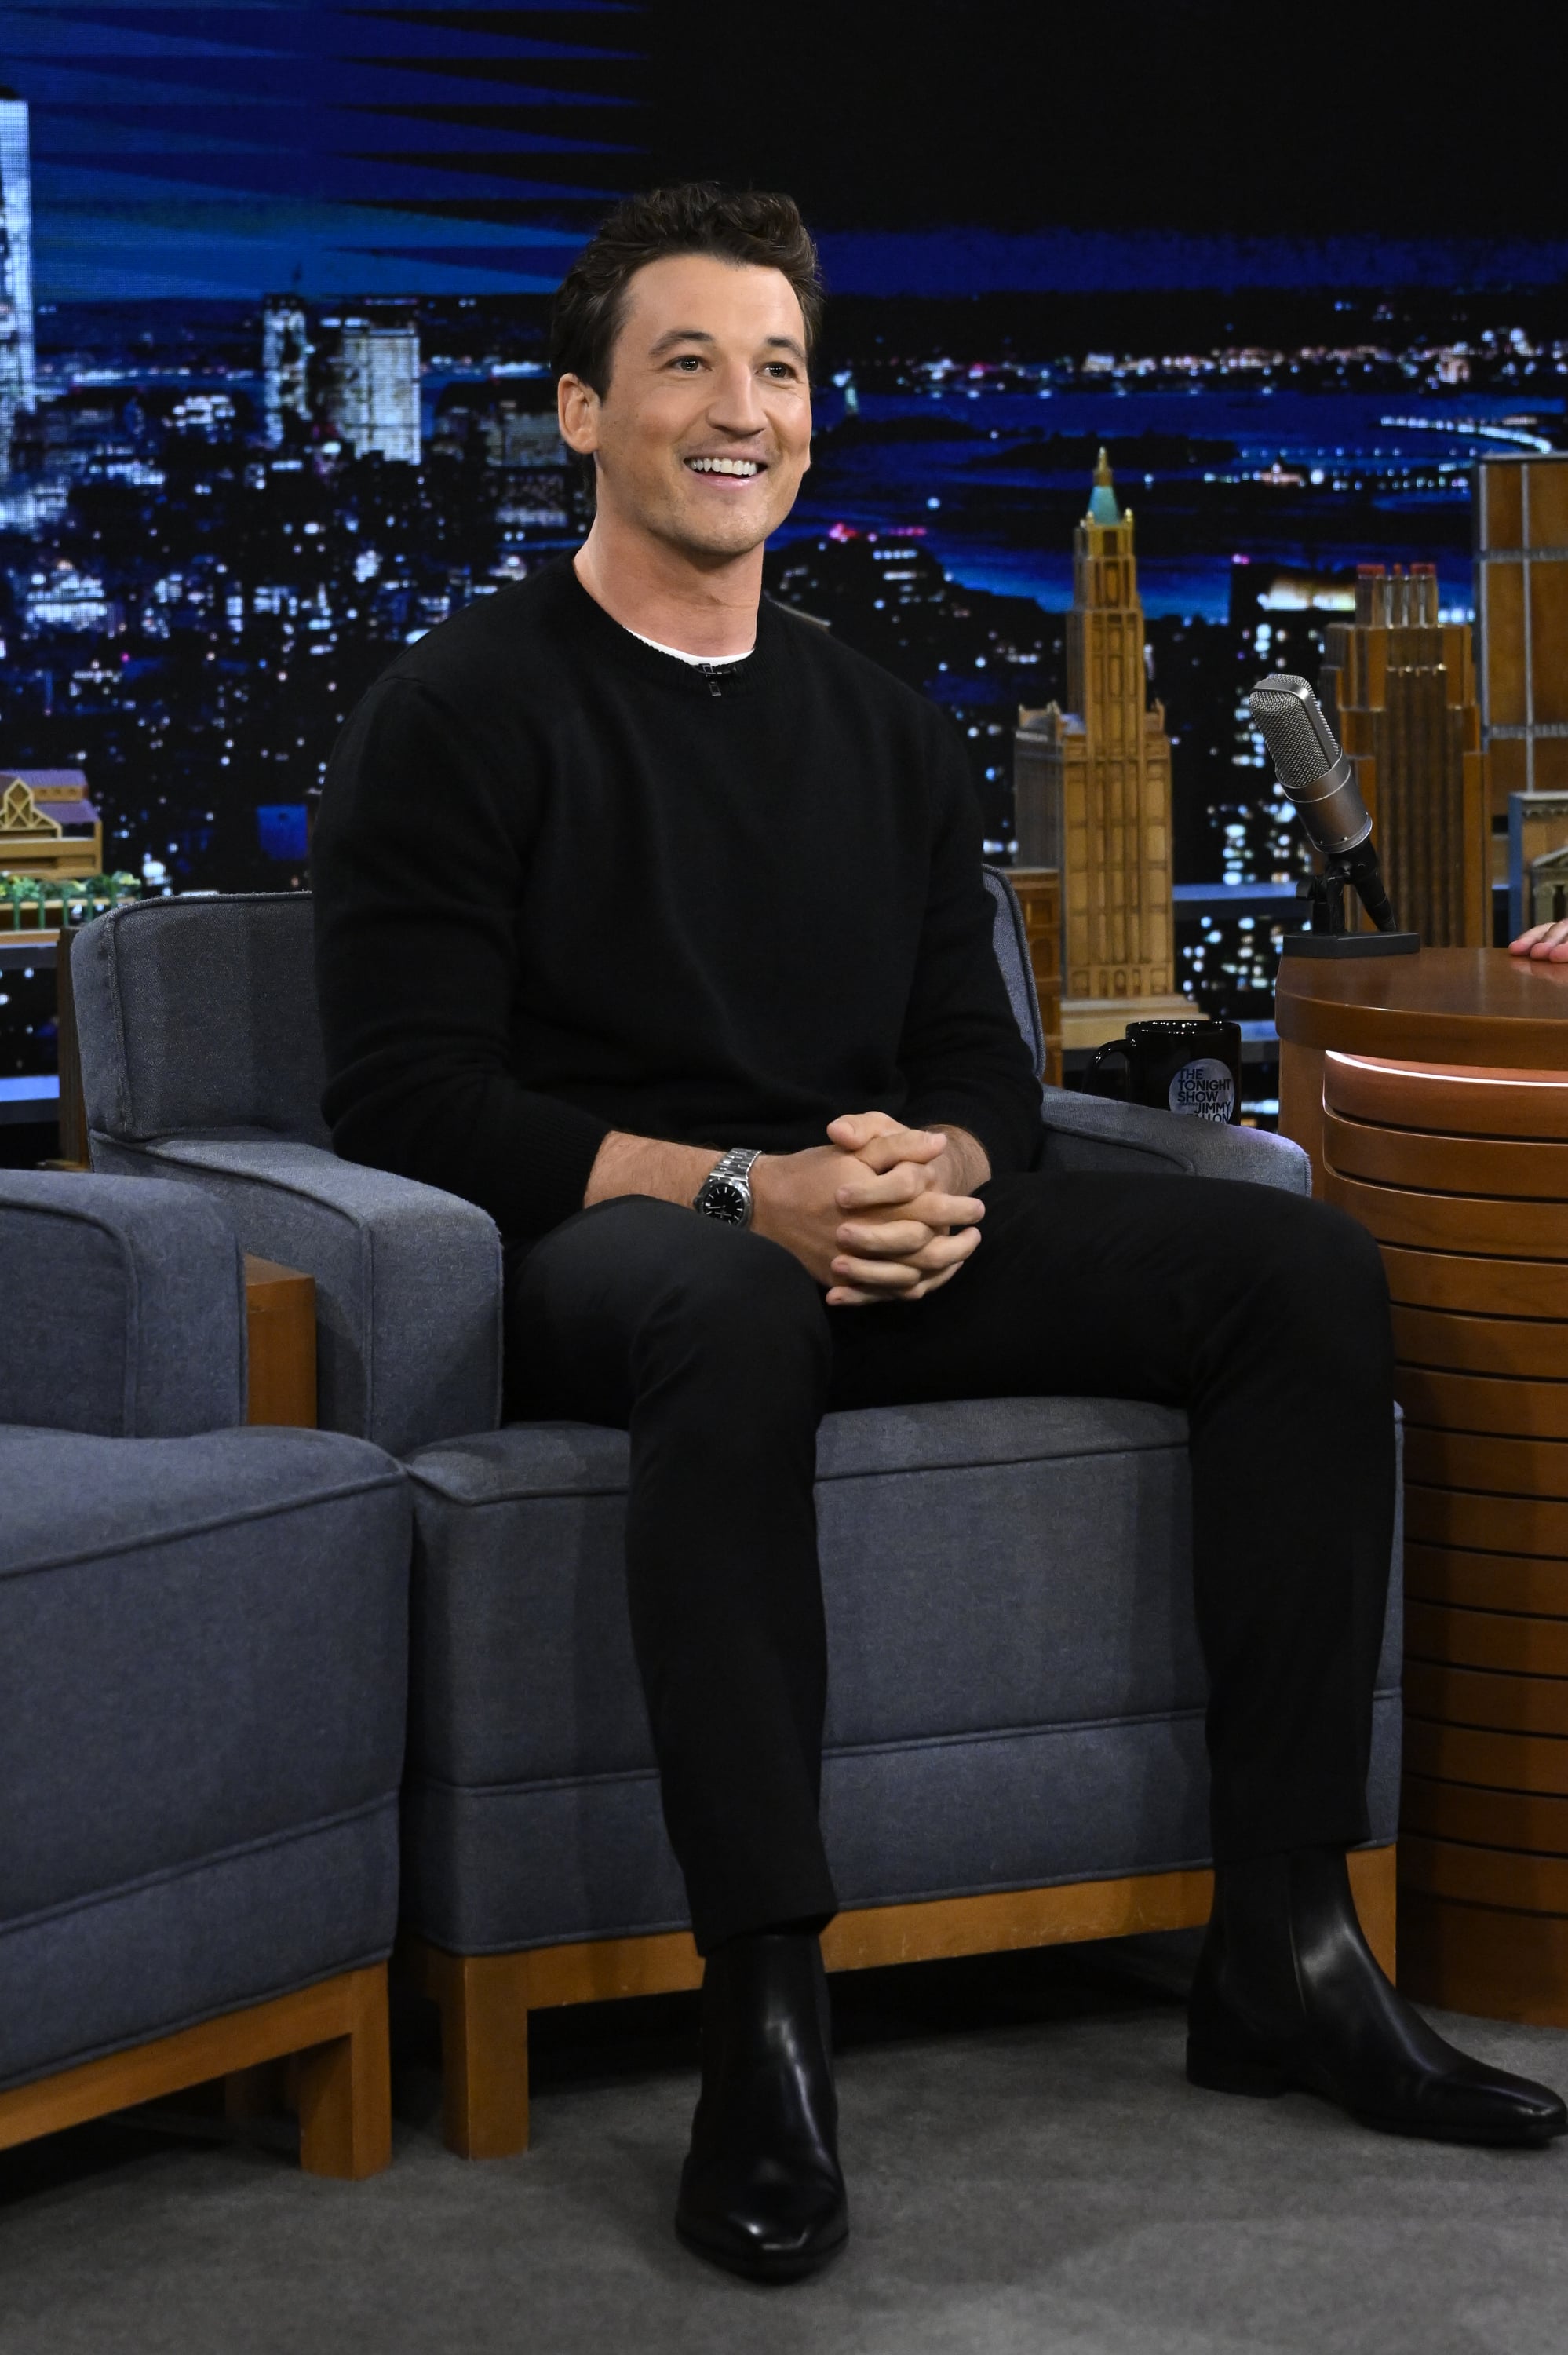 THE TONIGHT SHOW STARRING JIMMY FALLON -- Episode 1719 -- Pictured: Actor Miles Teller during an interview on Wednesday, September 28, 2022 -- (Photo by: Todd Owyoung/NBC via Getty Images)